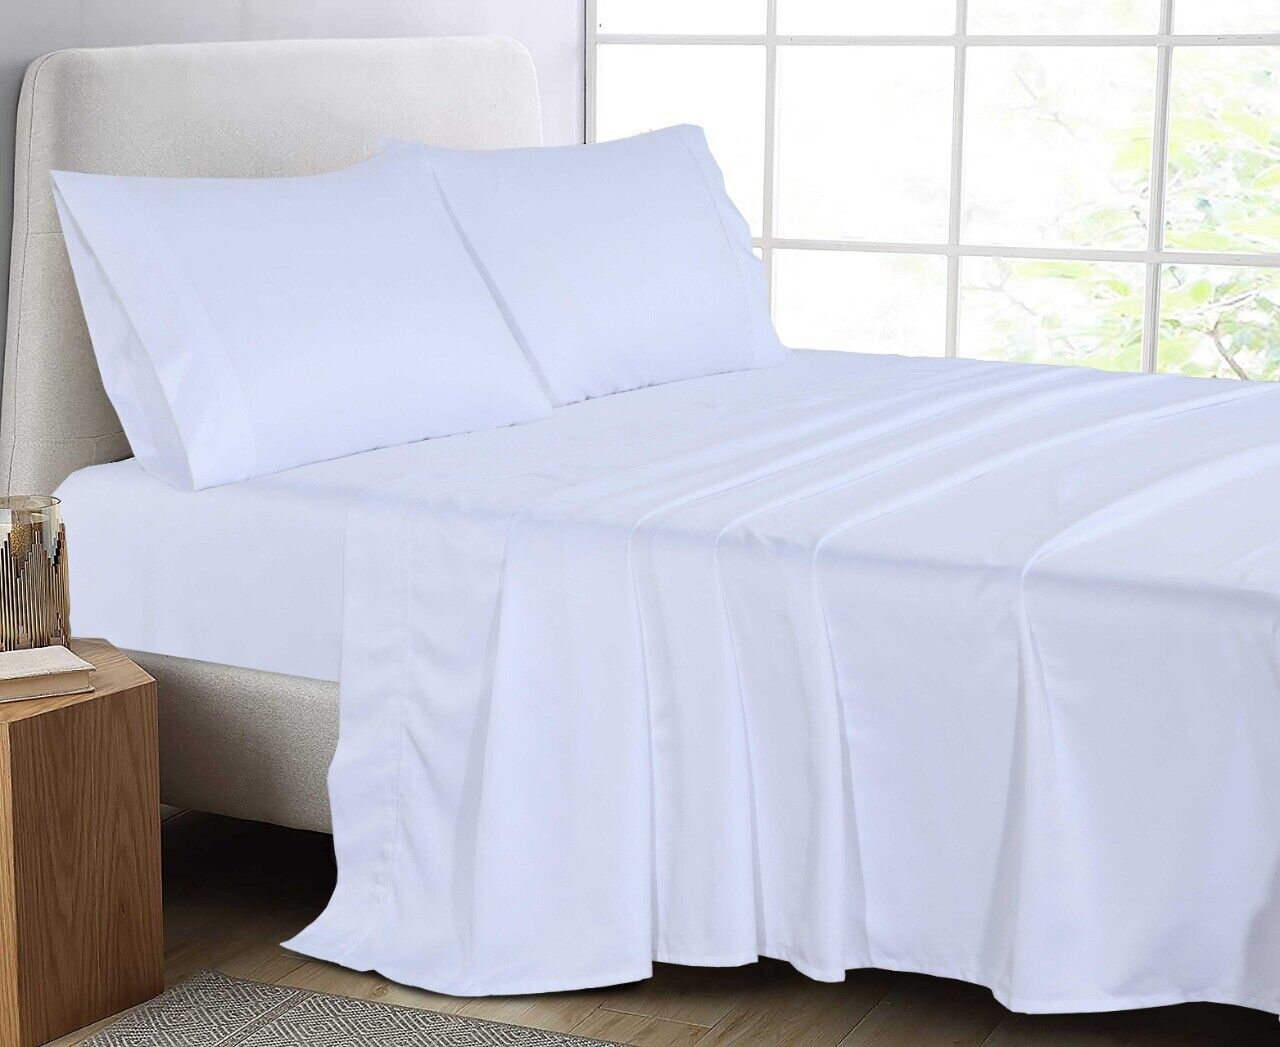 Cotton with Satin Sheet in a Set - 2 Pillows, 1 Flat & 1 Fitted Sheet